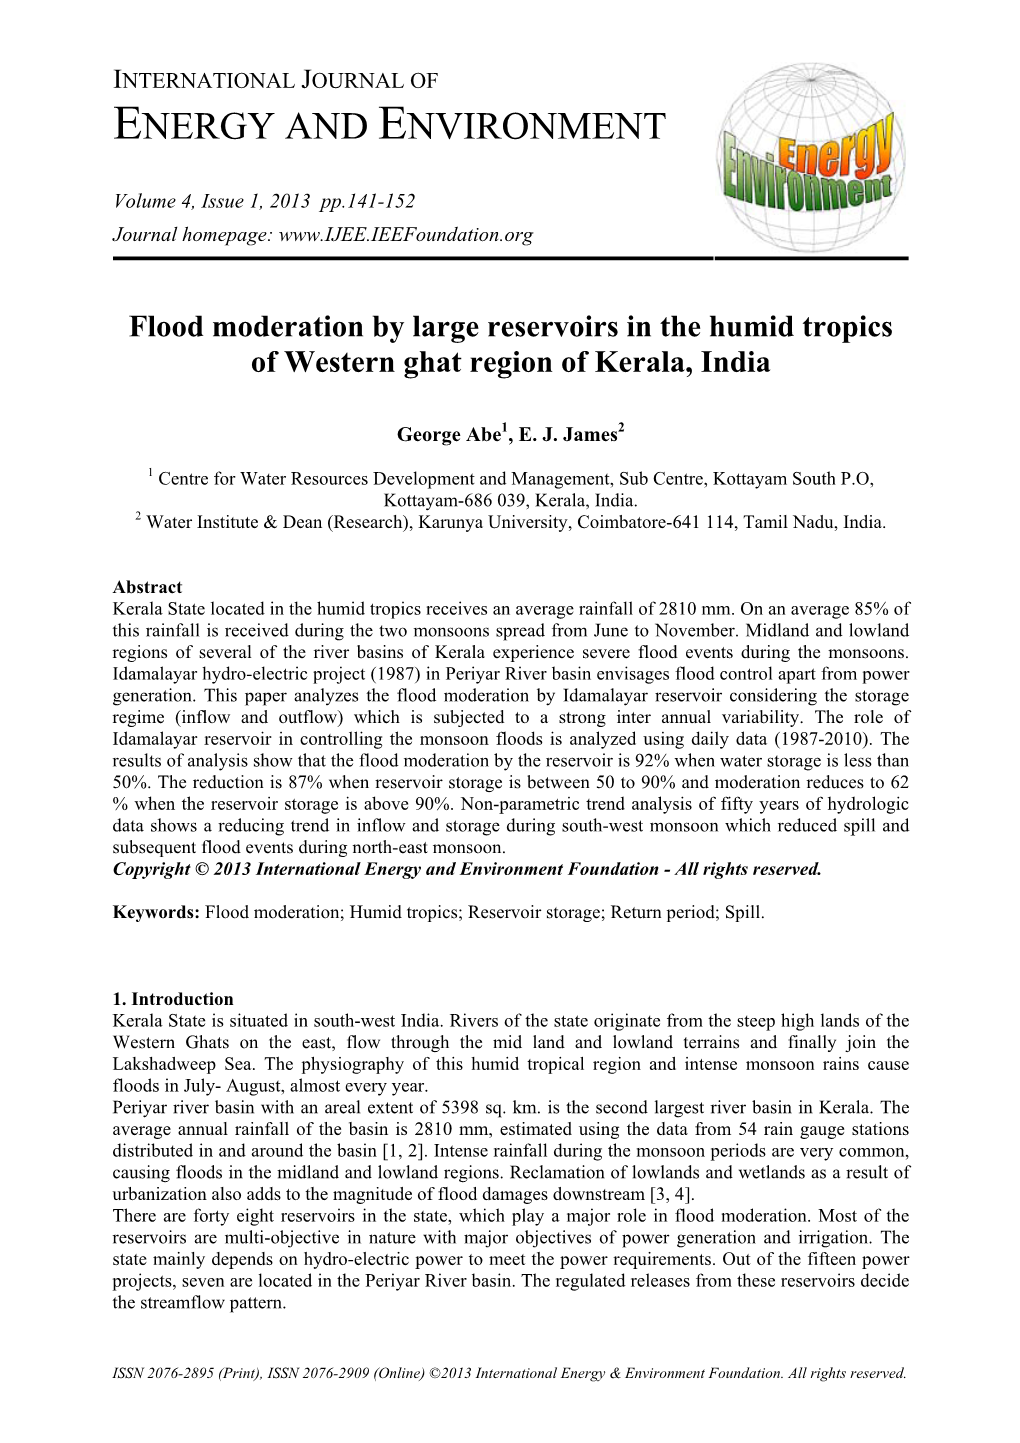 Download Full Text Article (PDF)